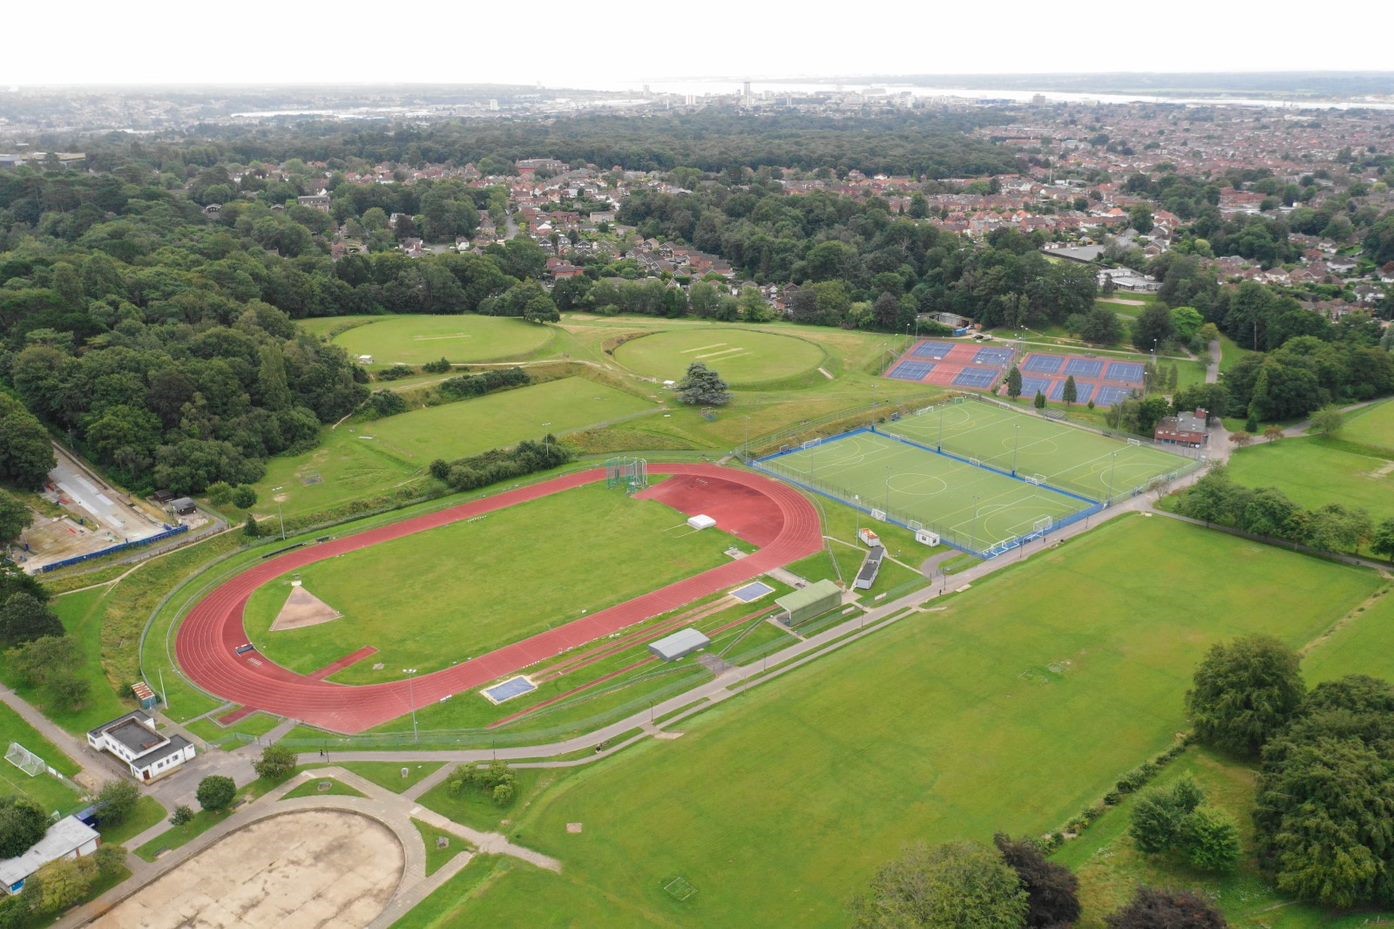 Drone aerial image of sports centre with burgundy athletics track, a white building, two green football pitches and a burgundy and blue tennis court in the distance. The facilities are surrounded by lots of green space and trees.